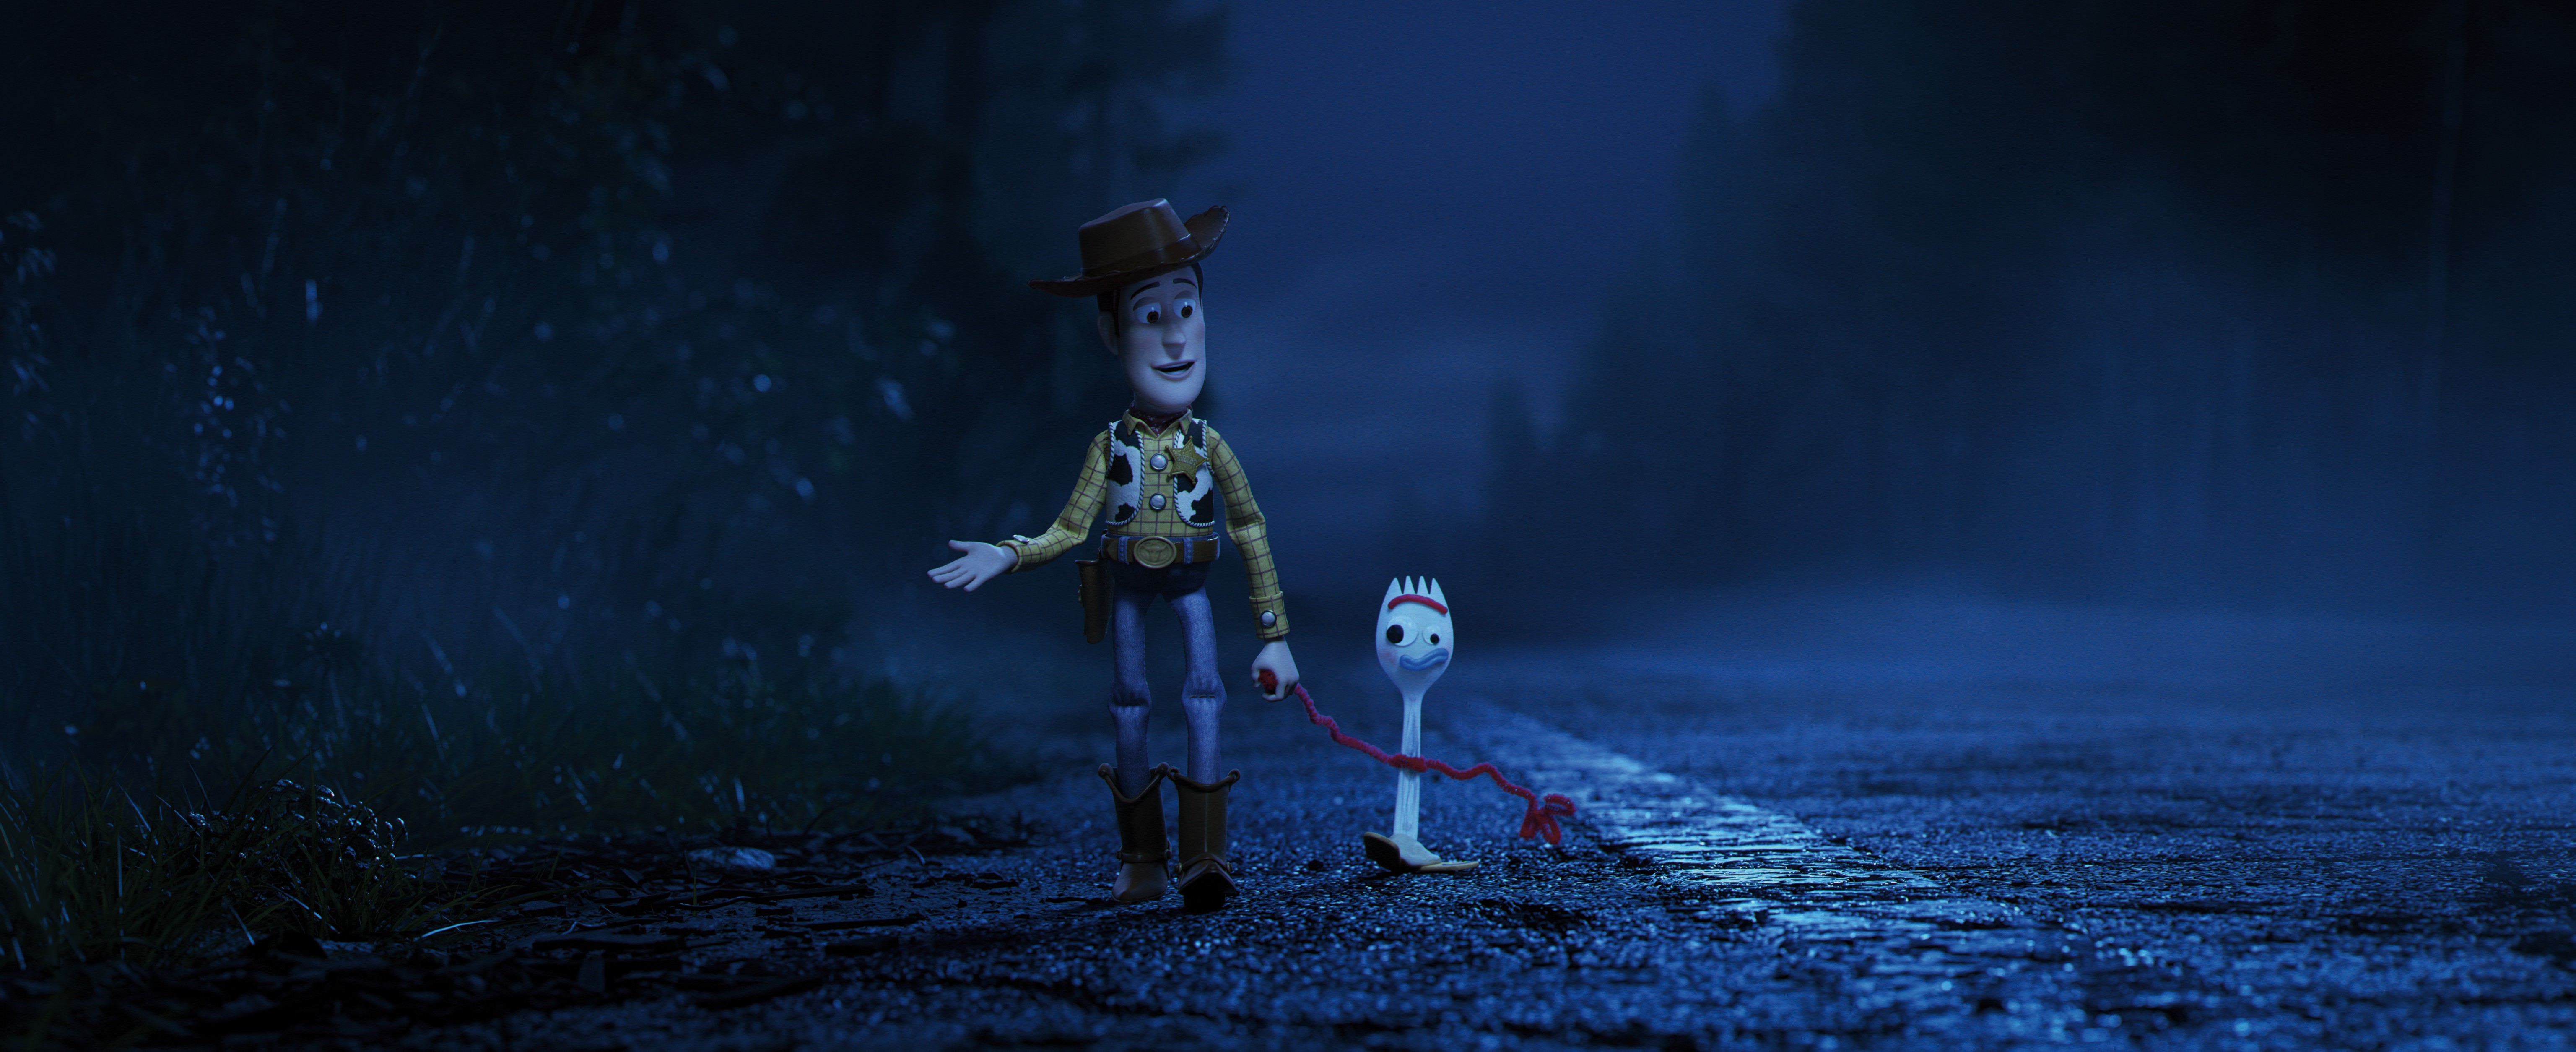 LEADING THE WAY -- In Disney•Pixar’s “Toy Story 4,” Bonnie’s beloved new craft-project-turned-toy, Forky, declares himself trash and not a toy, so Woody takes it upon himself to show Forky why he should embrace being a toy. Featuring Tom Hanks as the voic (Foto: Divulgação)